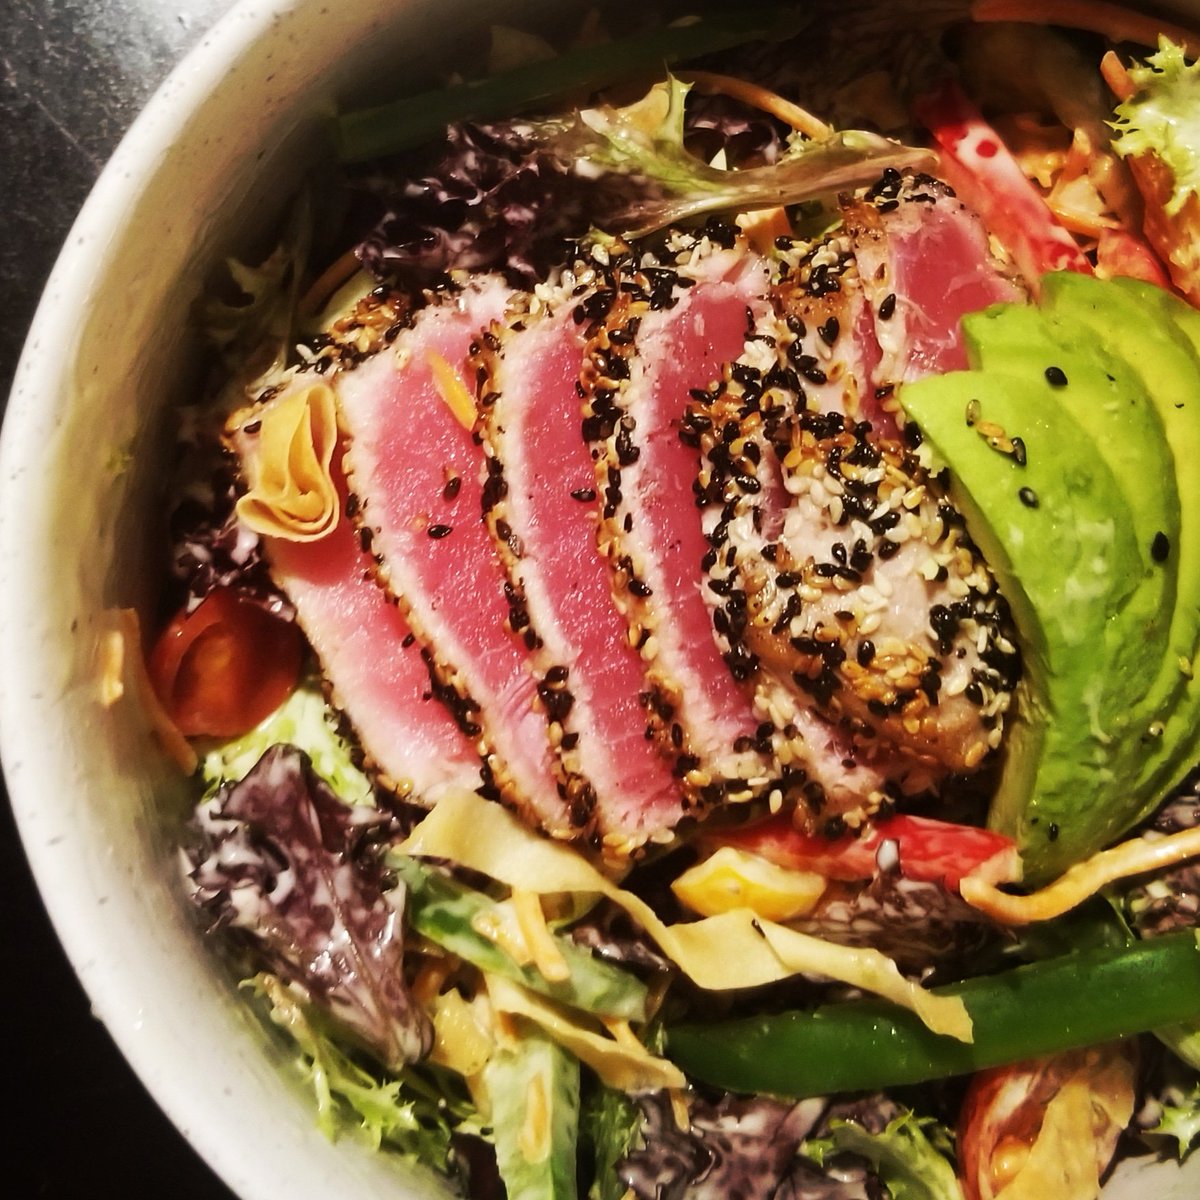 One of my absolute favorite salads in Sac: The Seared Ahi Tuna Salad with wasabi dressing from Riverside Clubhouse. It's been the highlight of my day with all this surge news. Treat yourself! #dinnertime #ahituna #damngoodsalad #sacramento #ilovefood #deliciousness #stephsfaves